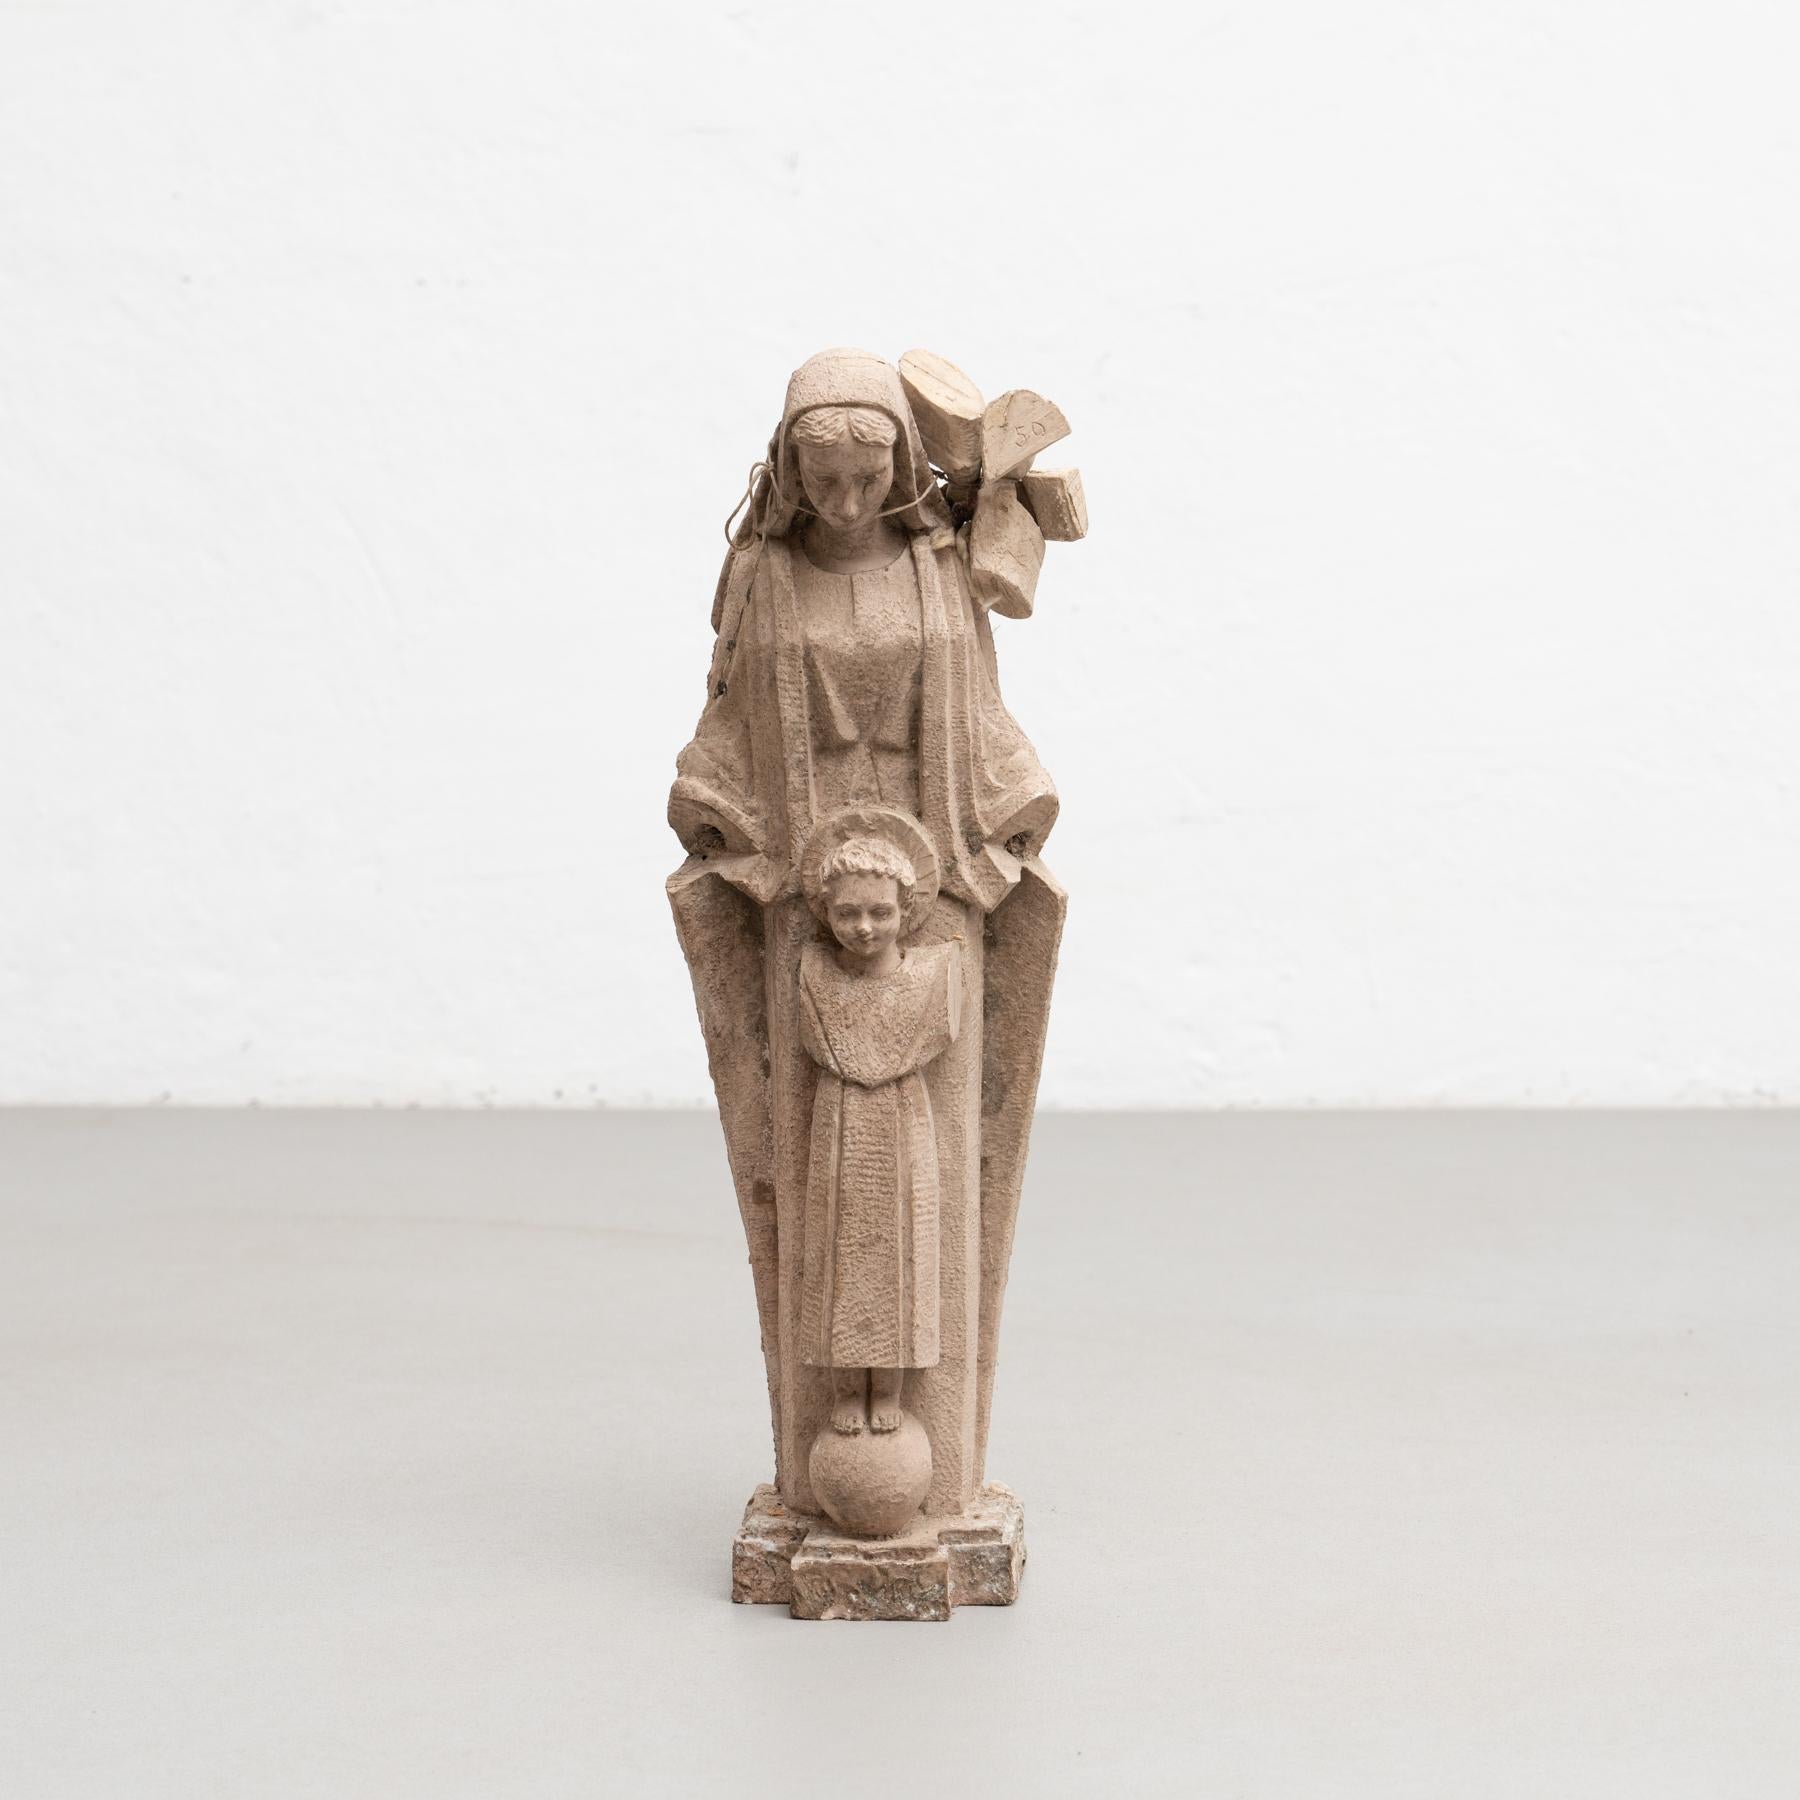 Traditional religious plaster figure of a virgin.

Made in traditional Catalan atelier in Olot, Spain, circa 1950.

In original condition, with minor wear consistent with age and use, preserving a beautiful patina.

Olot has a long tradition